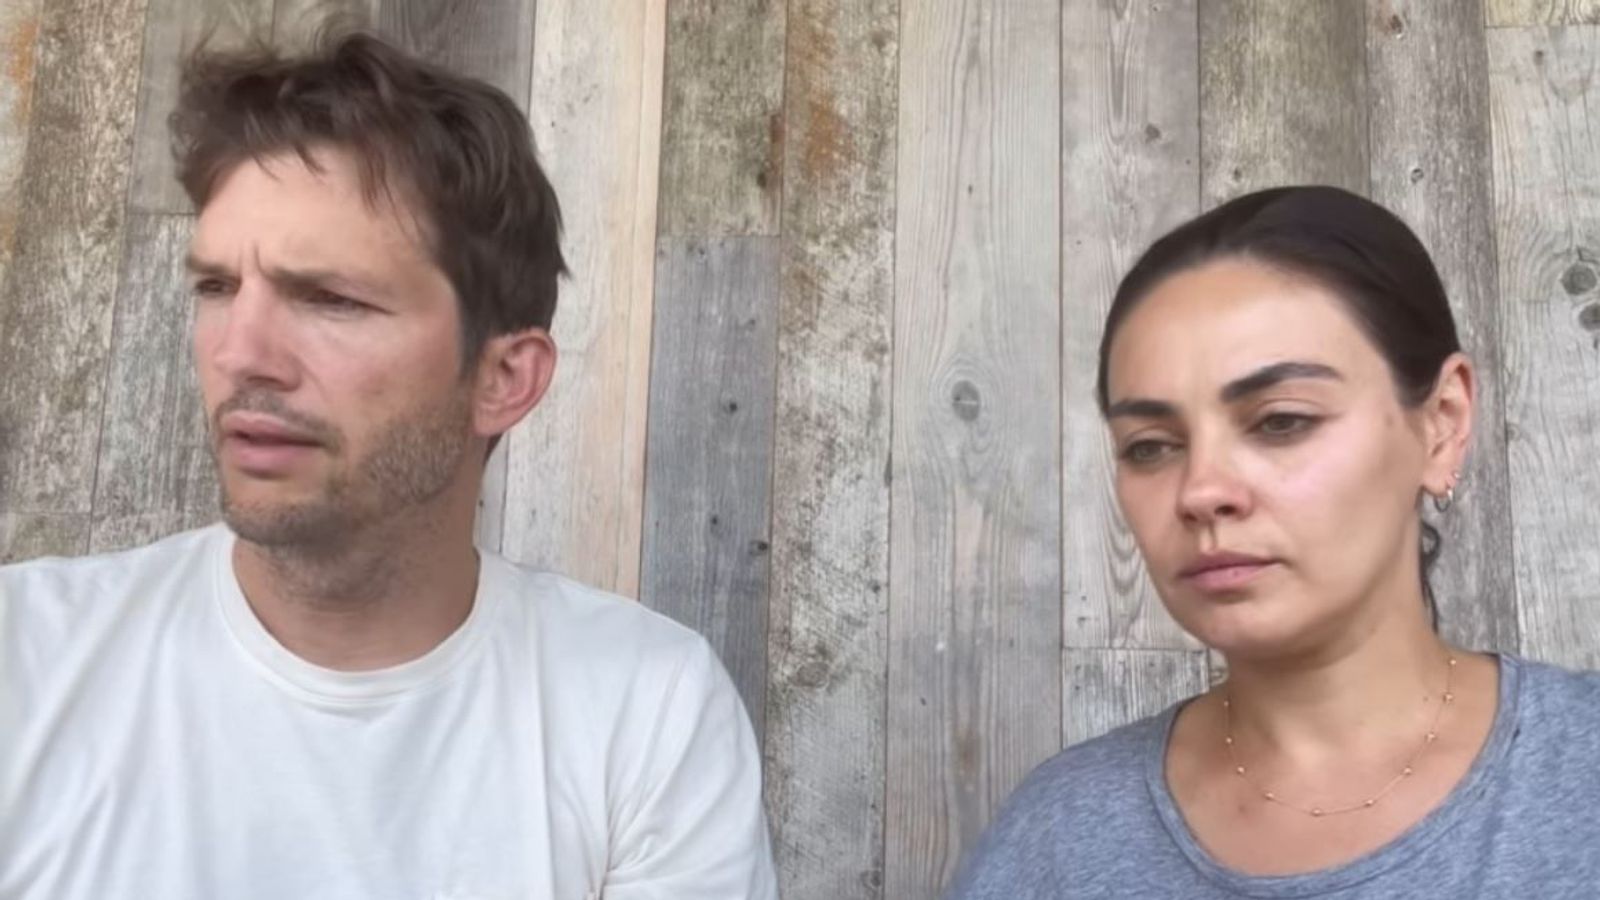 ‘We’re sorry’: Ashton Kutcher and Mila Kunis explain why they asked judge for leniency in case of rapist co-star | Ents & Arts News